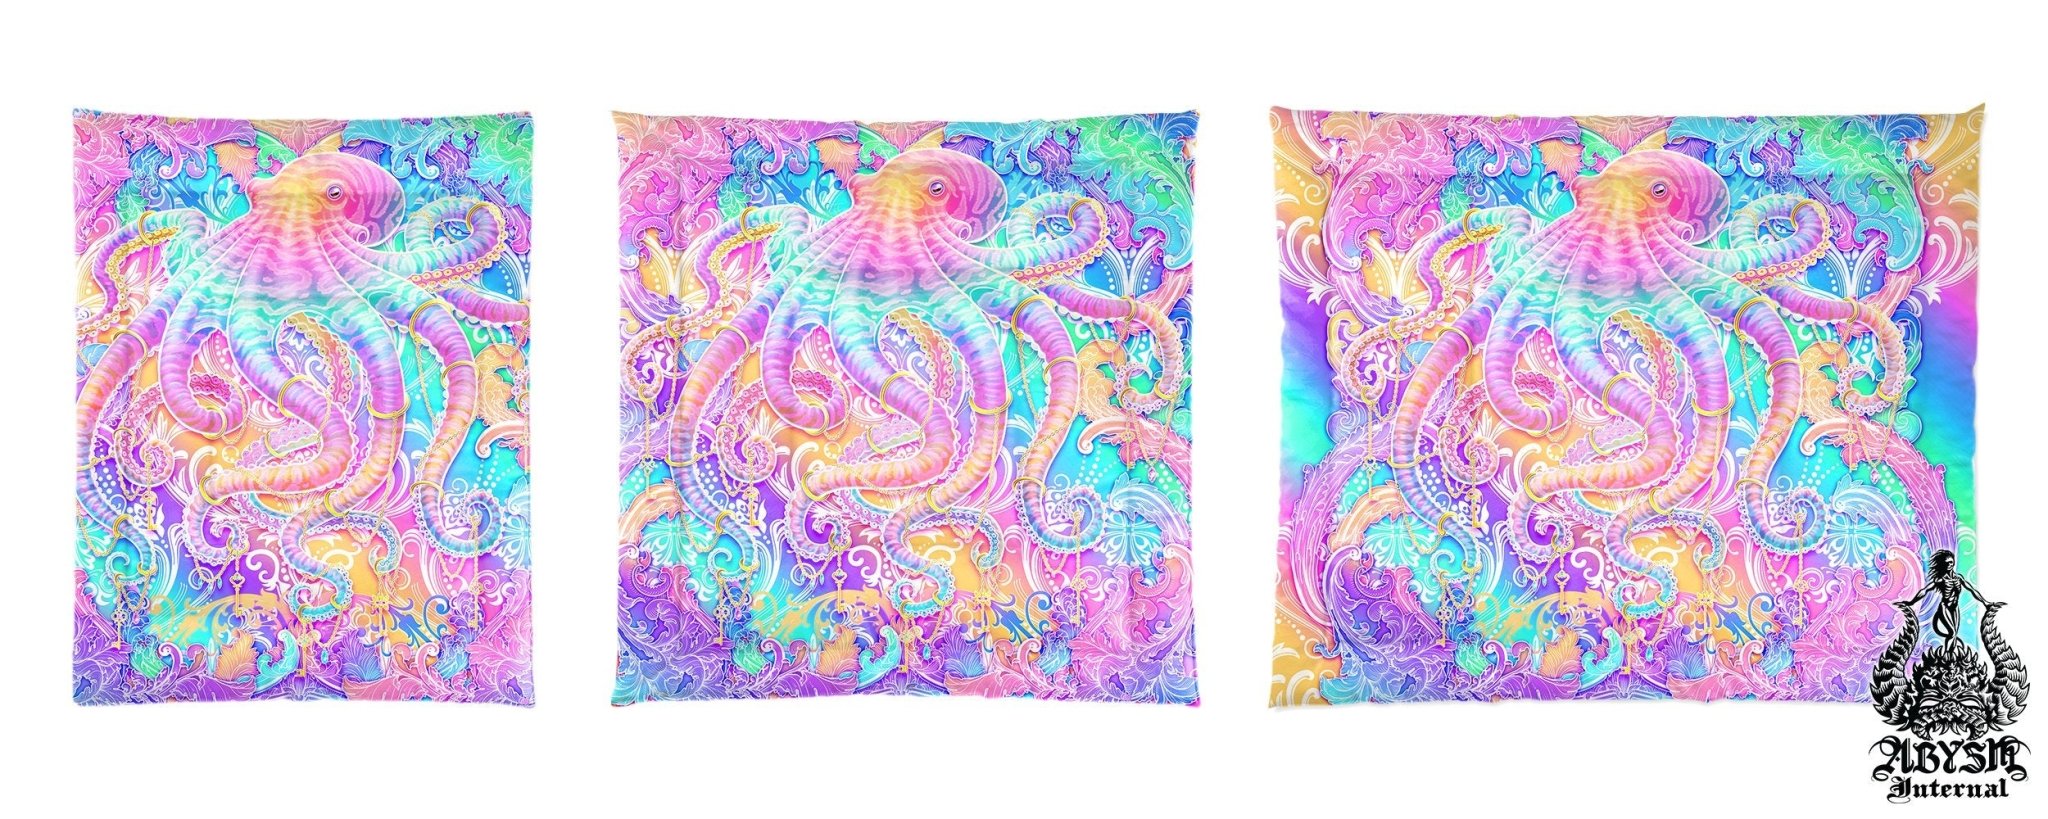 Pastel Bedding Set, Comforter and Duvet, Aesthetic Bed Cover, Kawaii Gamer Bedroom Decor, King, Queen and Twin Size - Kawaii Octopus, Fairy Kei - Abysm Internal